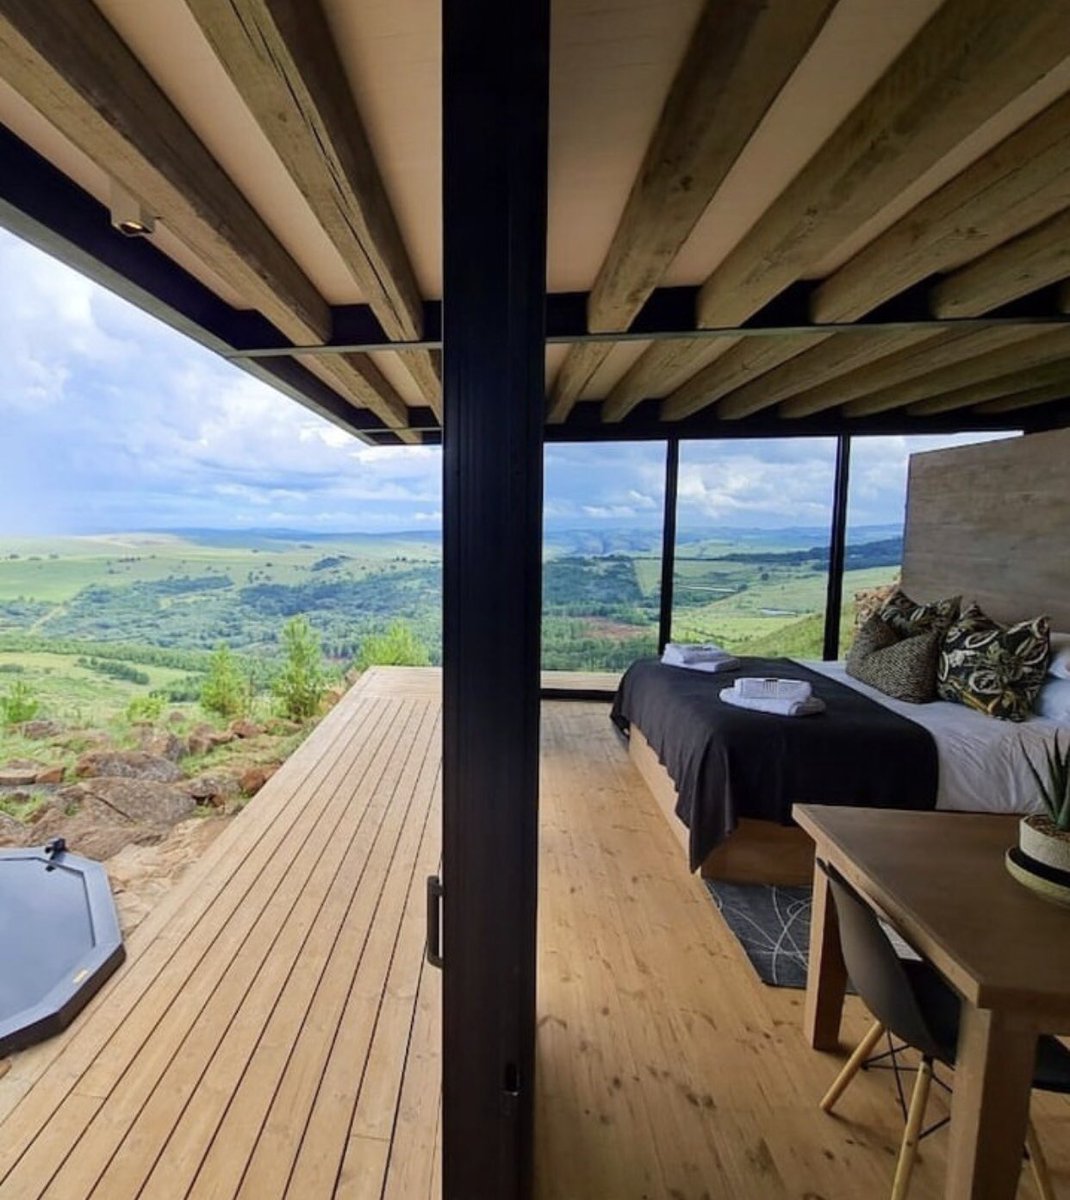 📍#Mpumalanga #Dullstroom EagleView - Stunner 🔥🔥🔥No caption required! First available weekend is Sep 16th (as of today) subject to availability. T&C Apply Email: info@travelelegancesa.co.za Link in Bio 📍 #Travel #VisitSouthAfrica